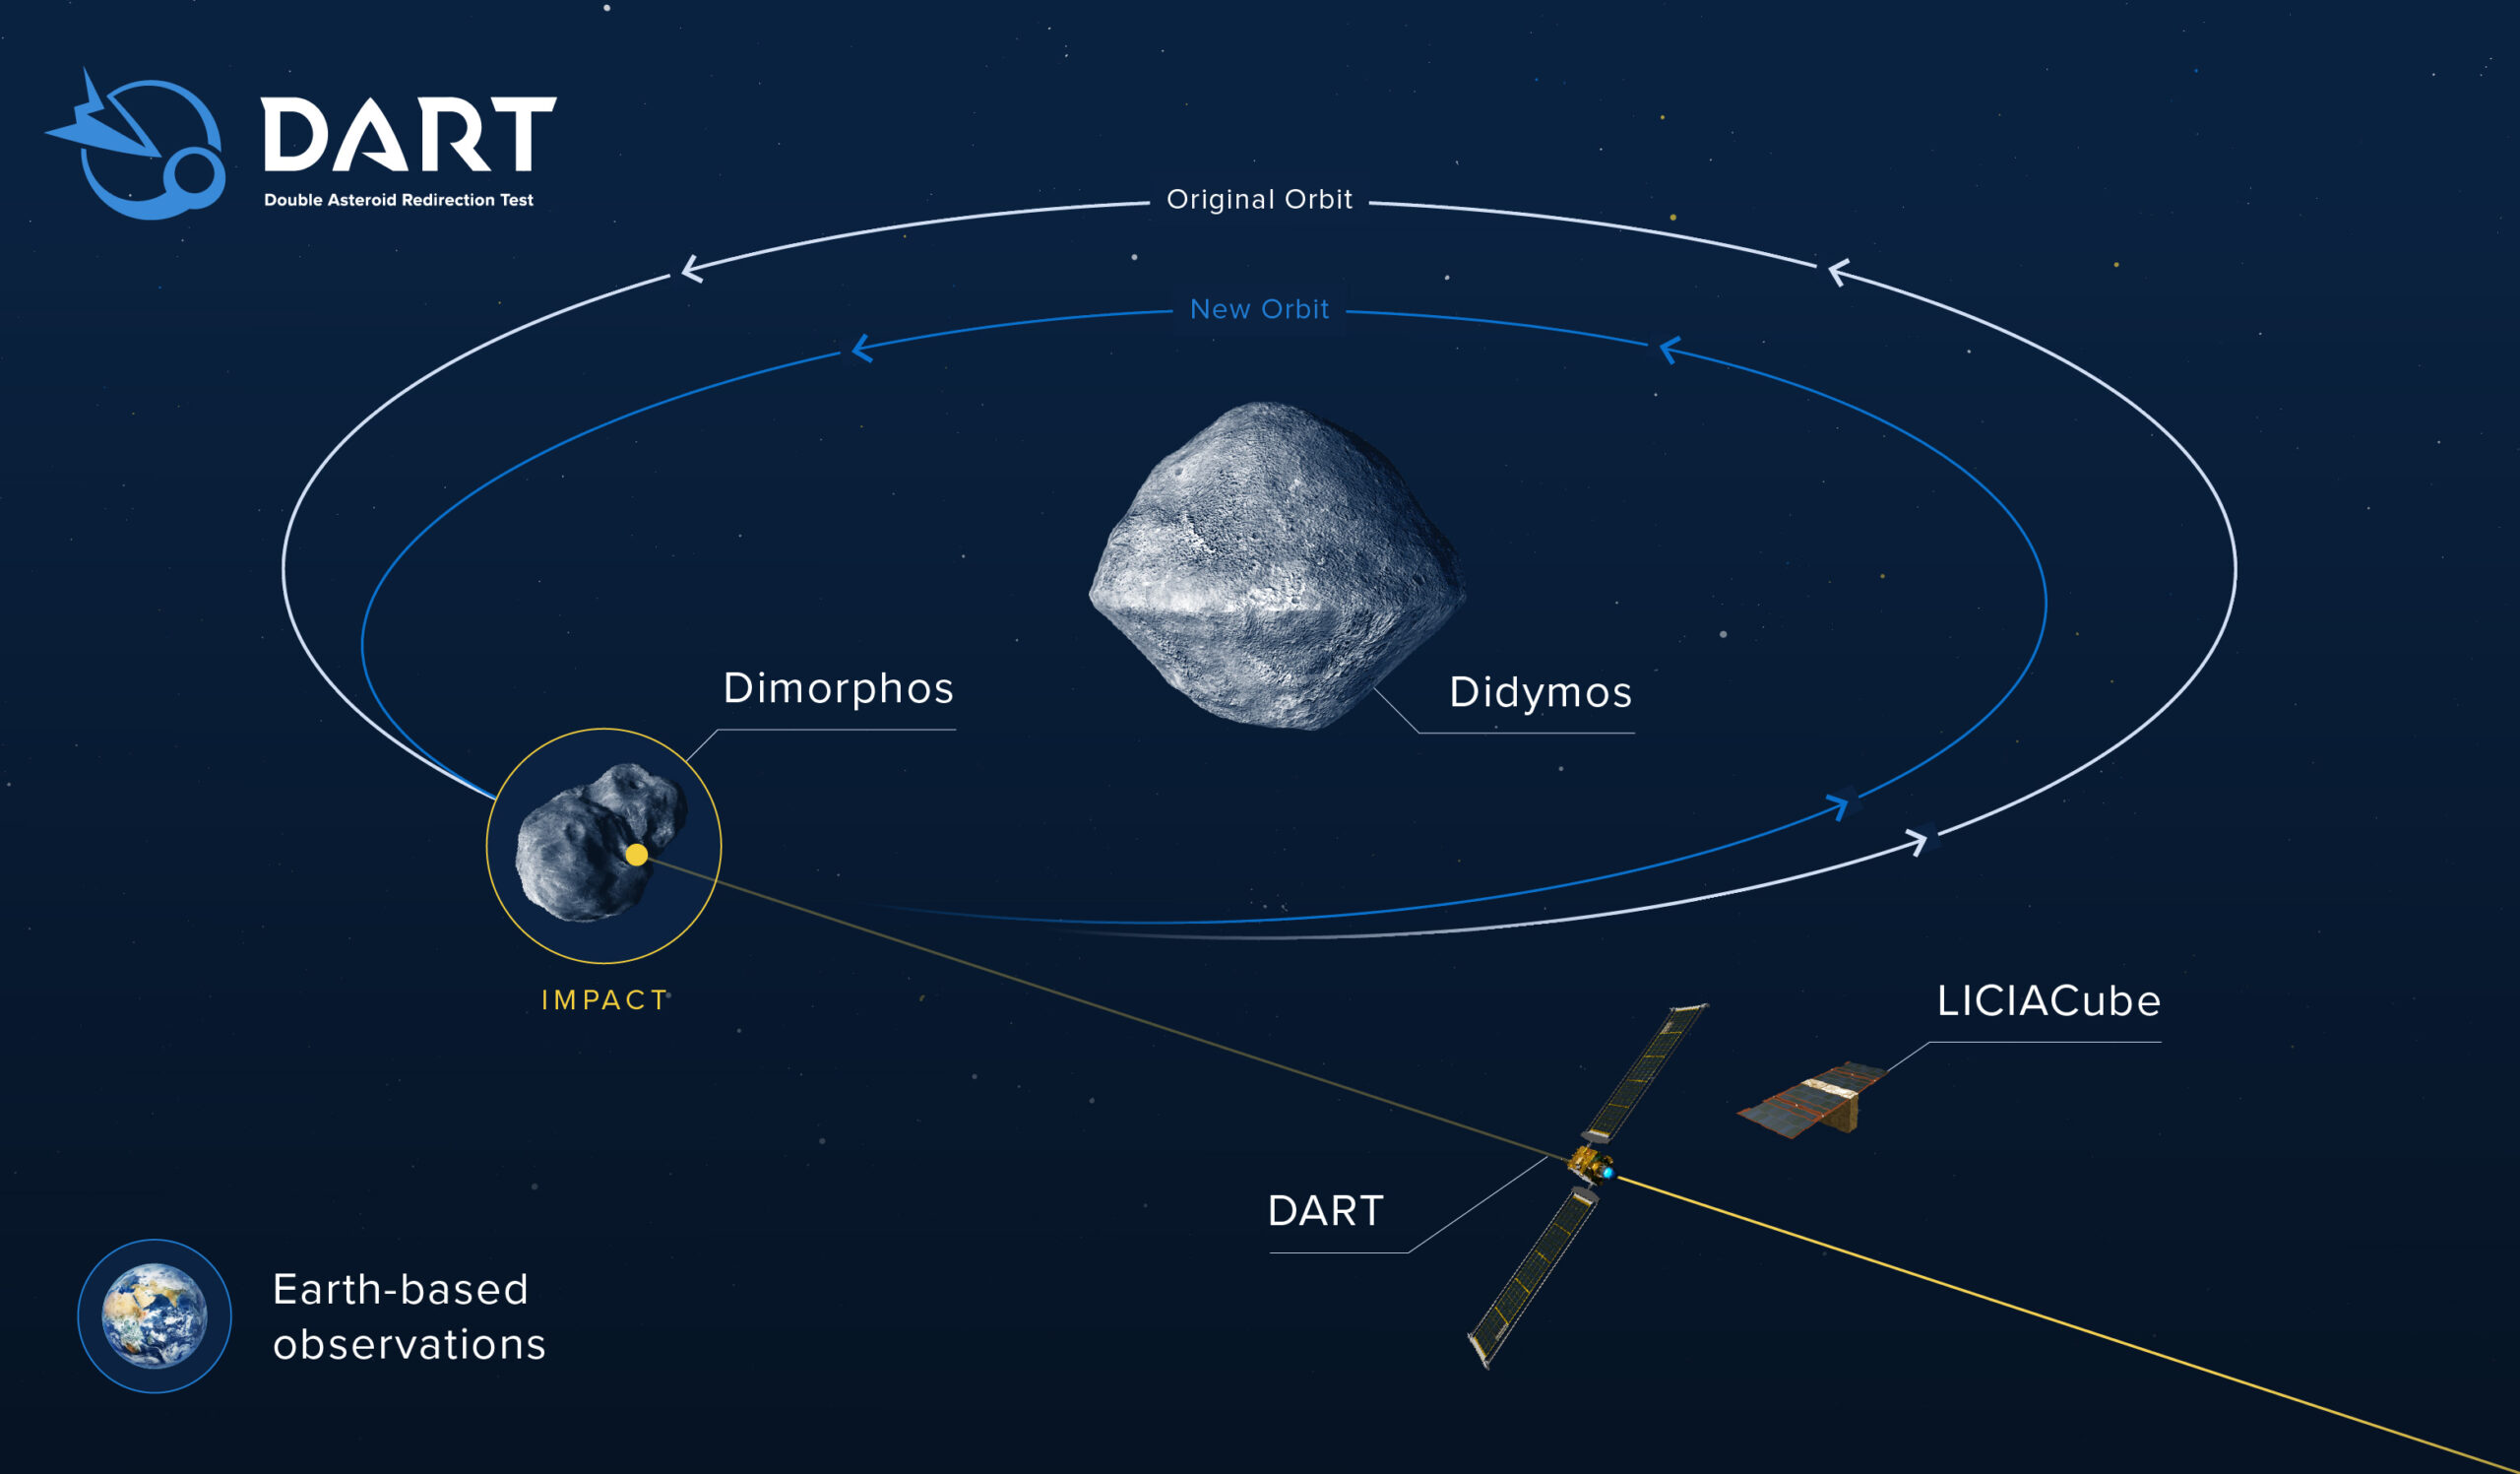 NASA infographic for DART asteroid redirection space mission